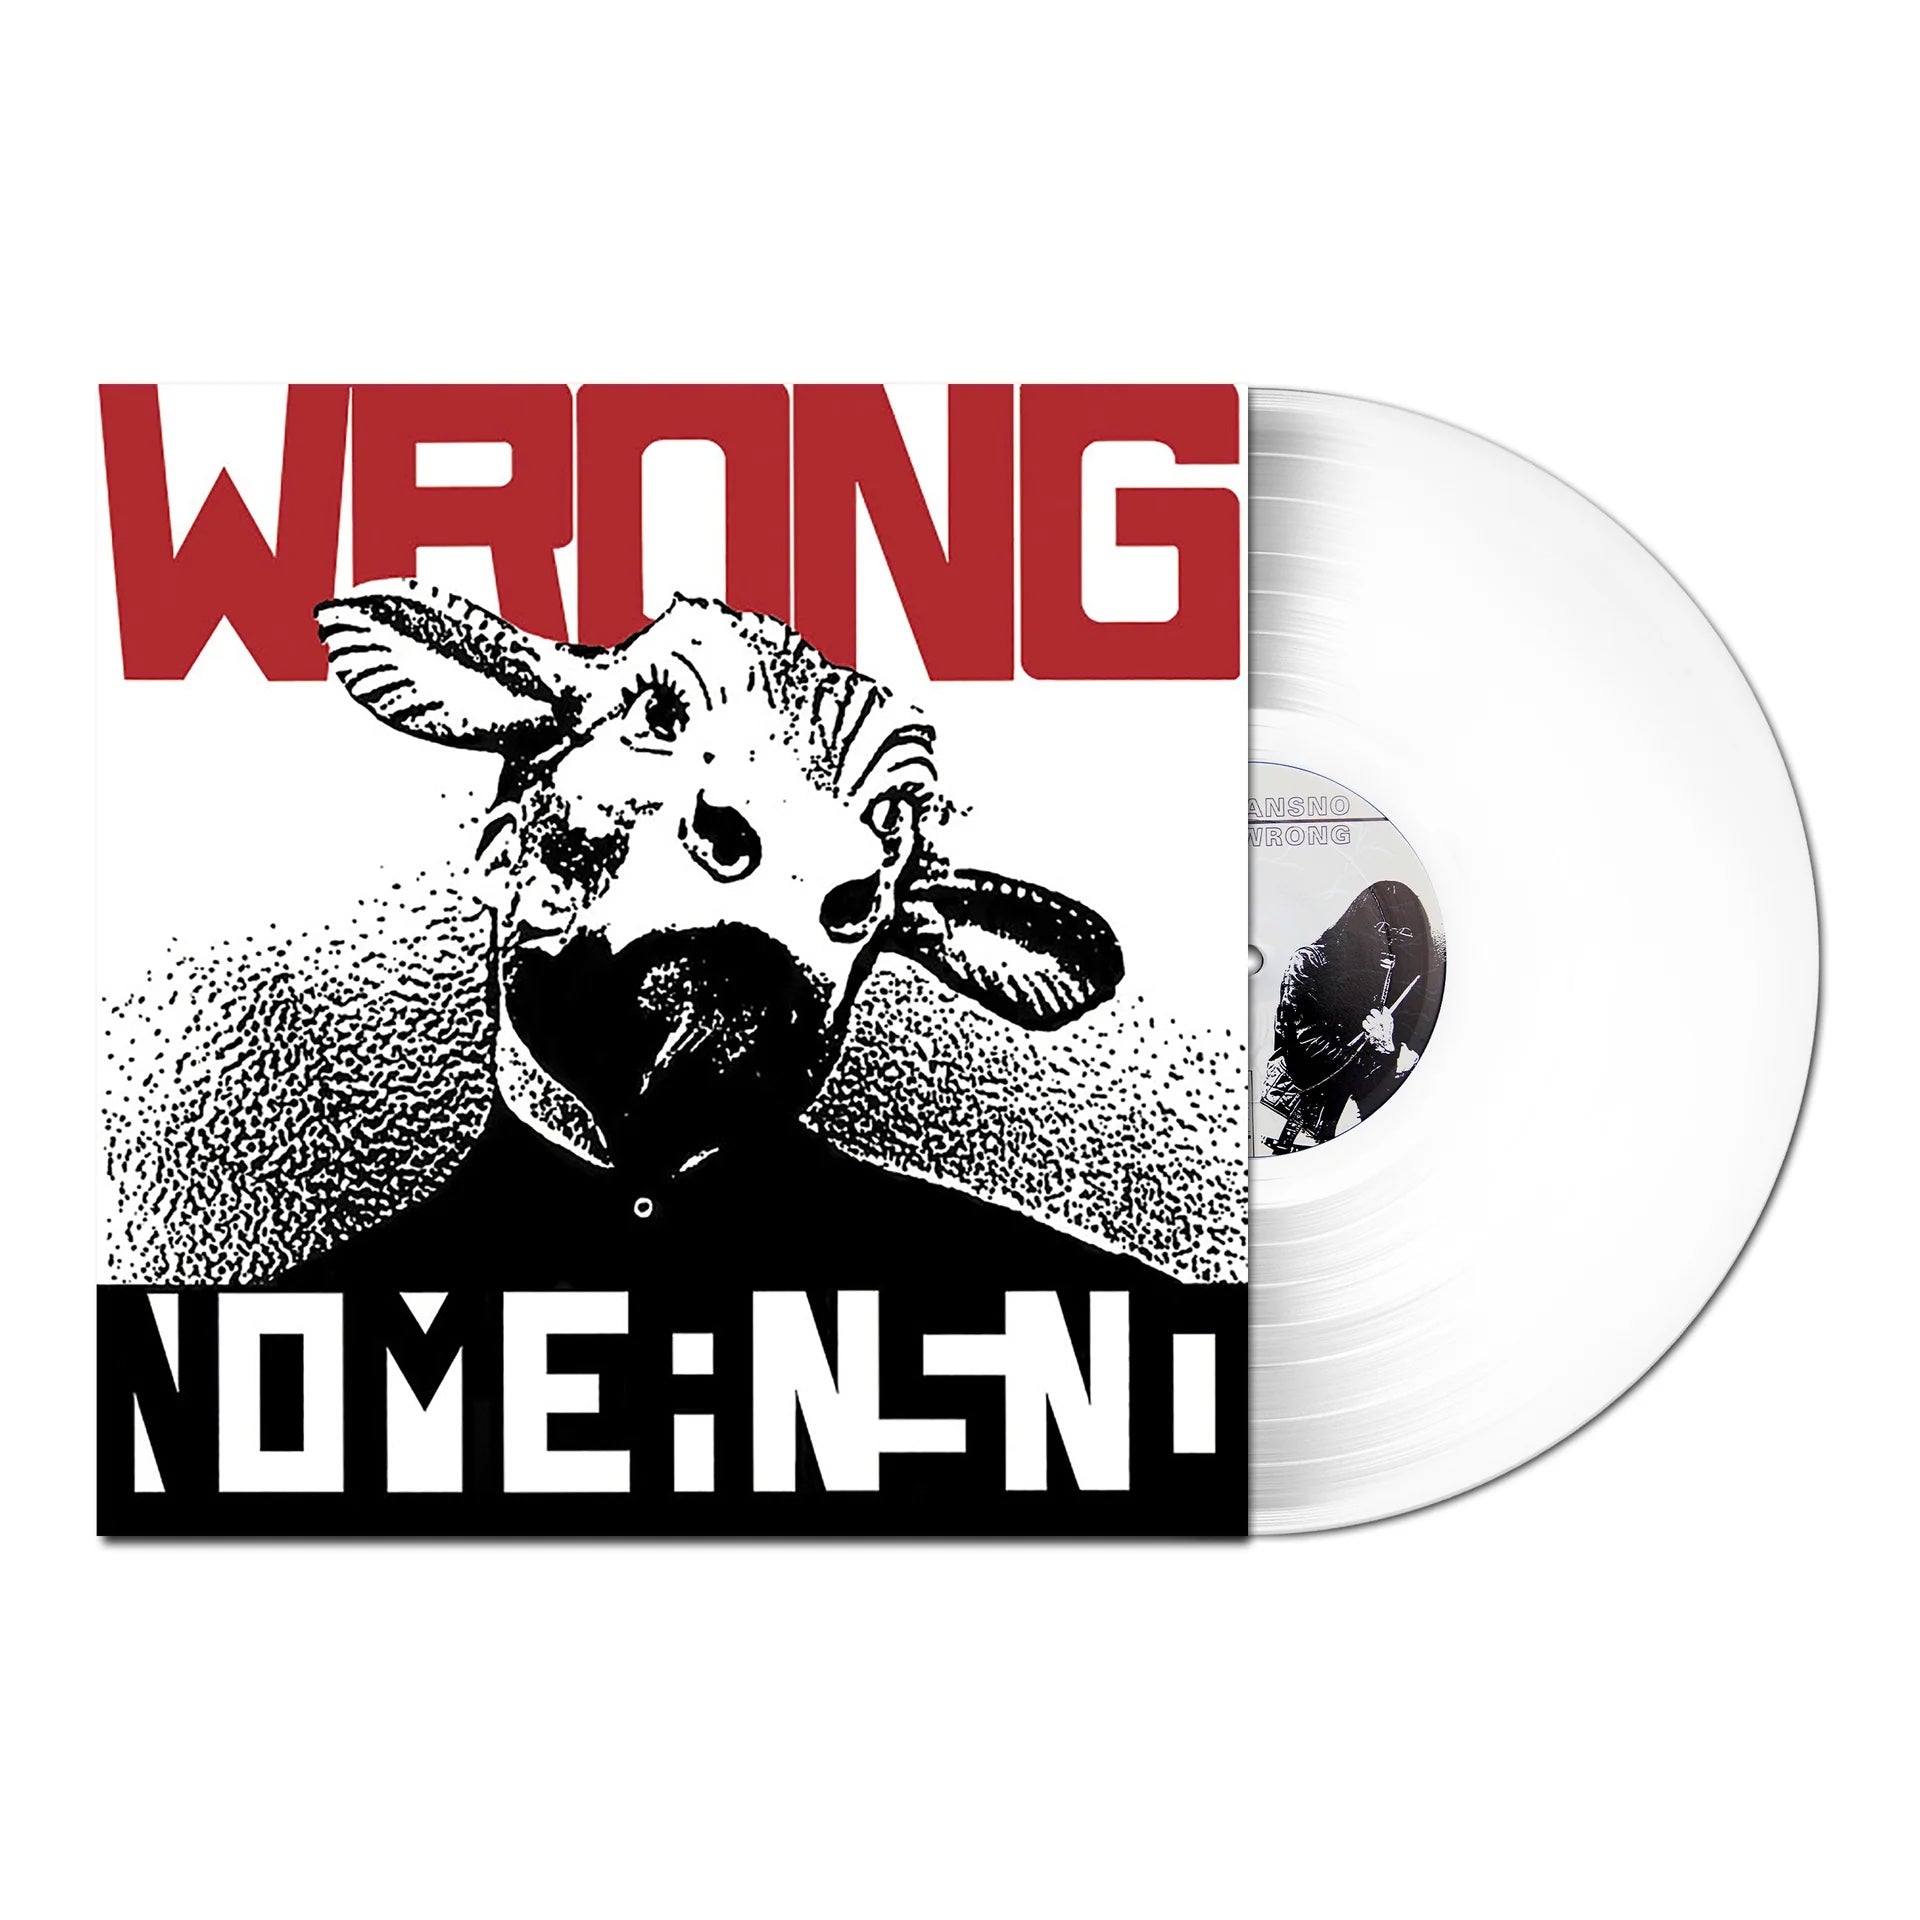 NEW "WRONG" LIMITED PRE-SALE EDITION ANNOUNCED